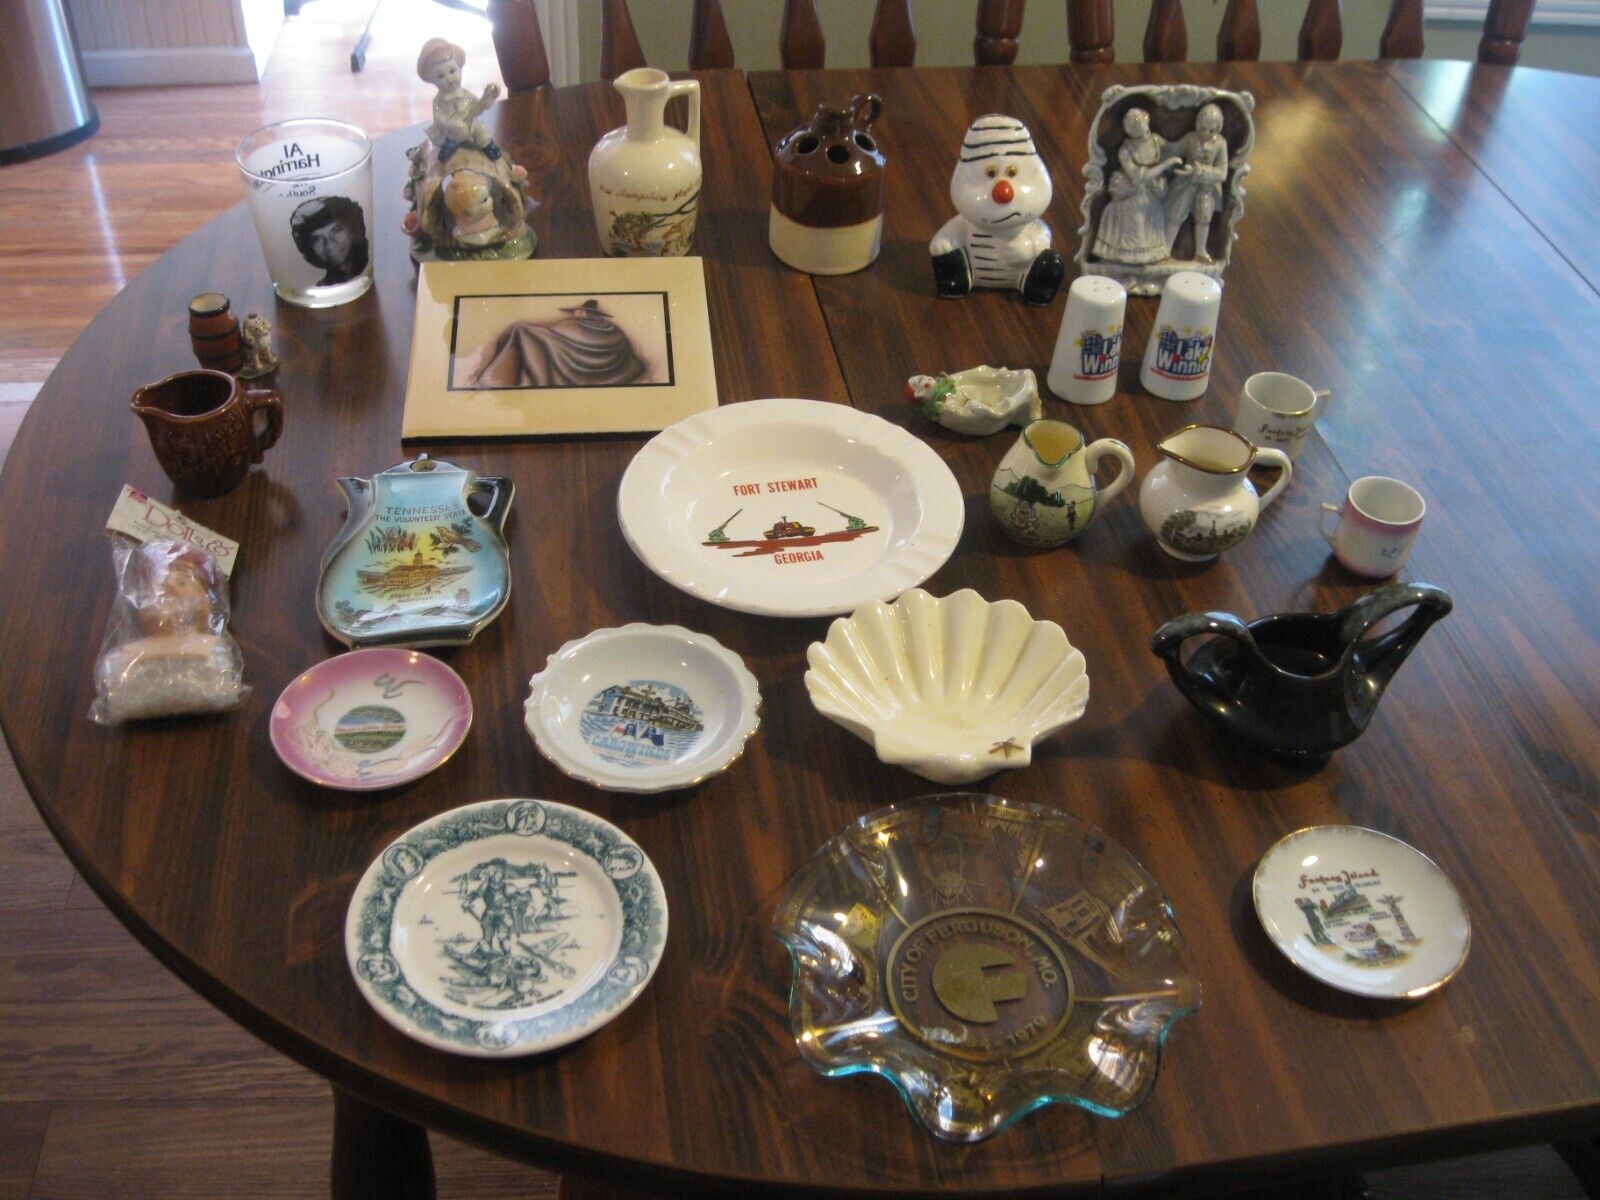 Lot 26 Mostly Vintage Thrift Store Flea Market Collectible Glass Ceramic SMALLS